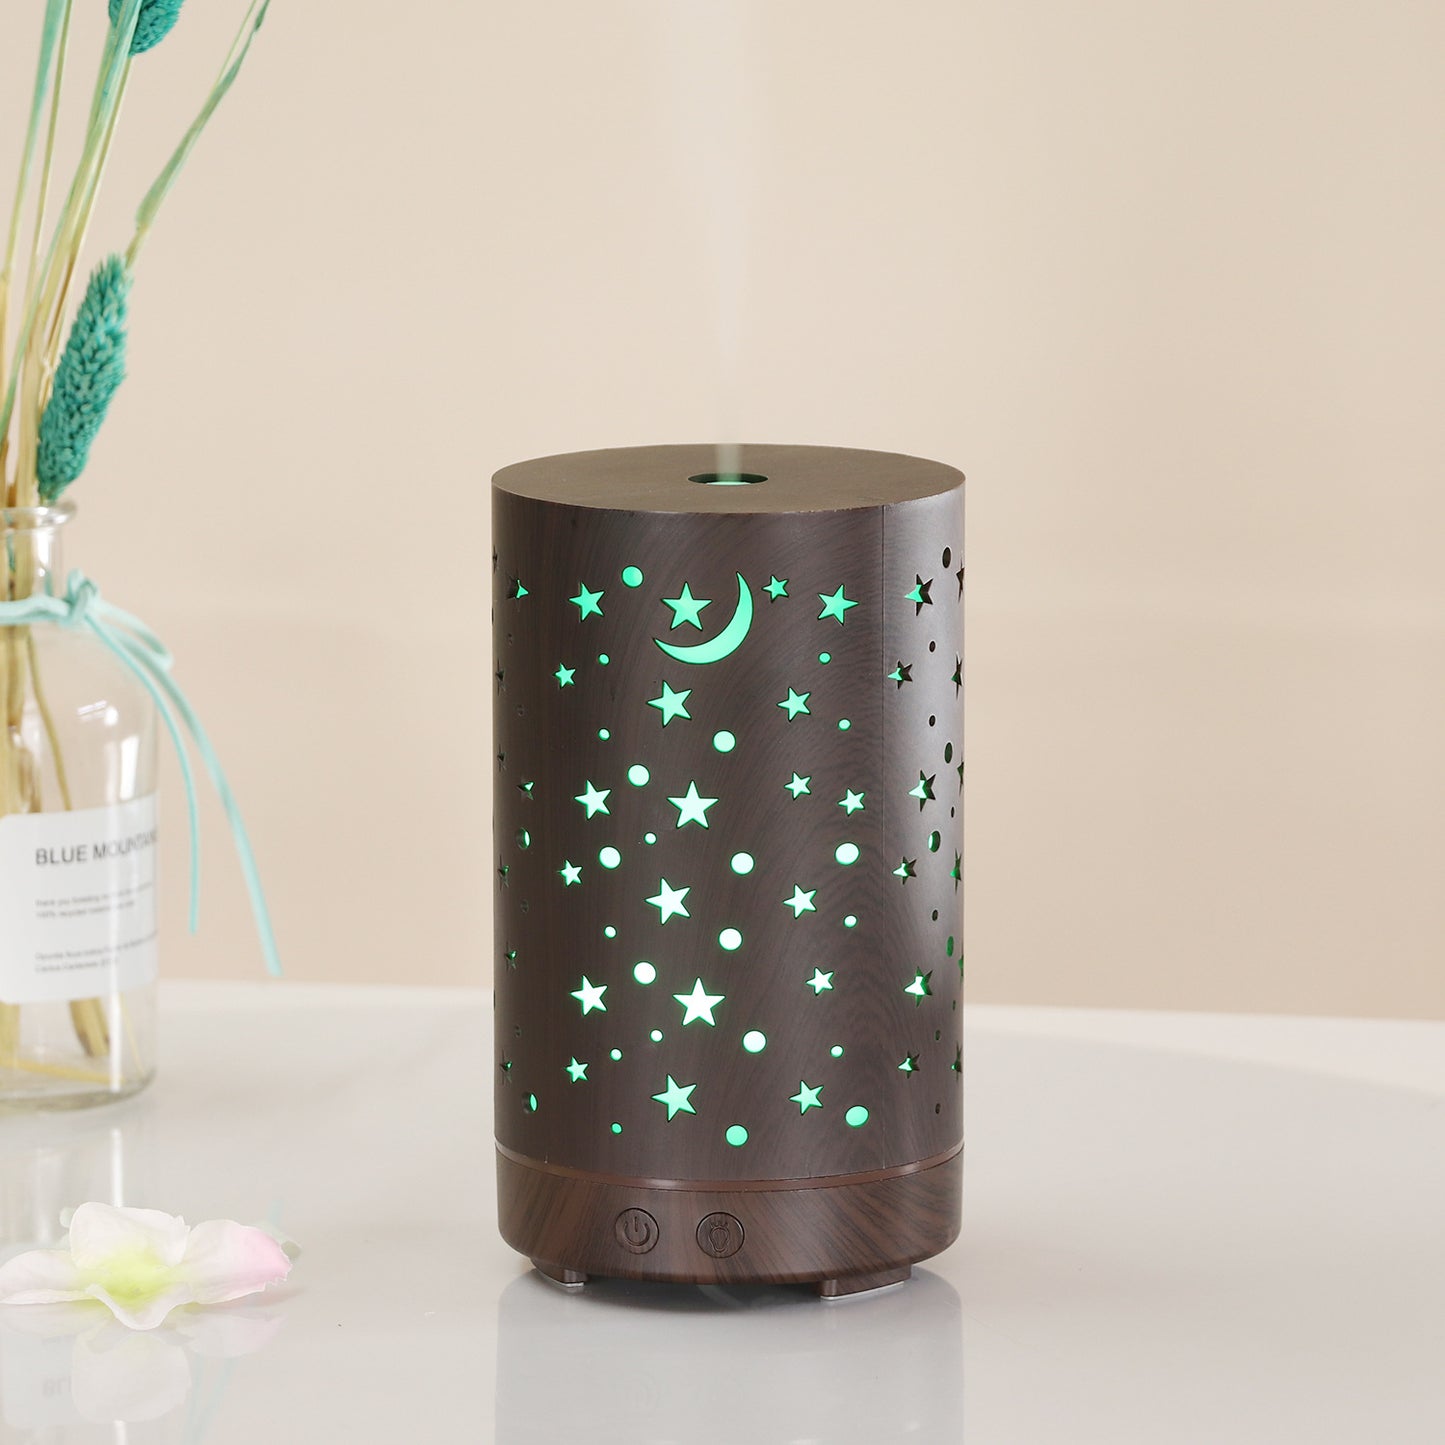 Hollow aroma diffuser ultrasonic atomizer household colorful night light desktop essential oil aromatherapy humidifier